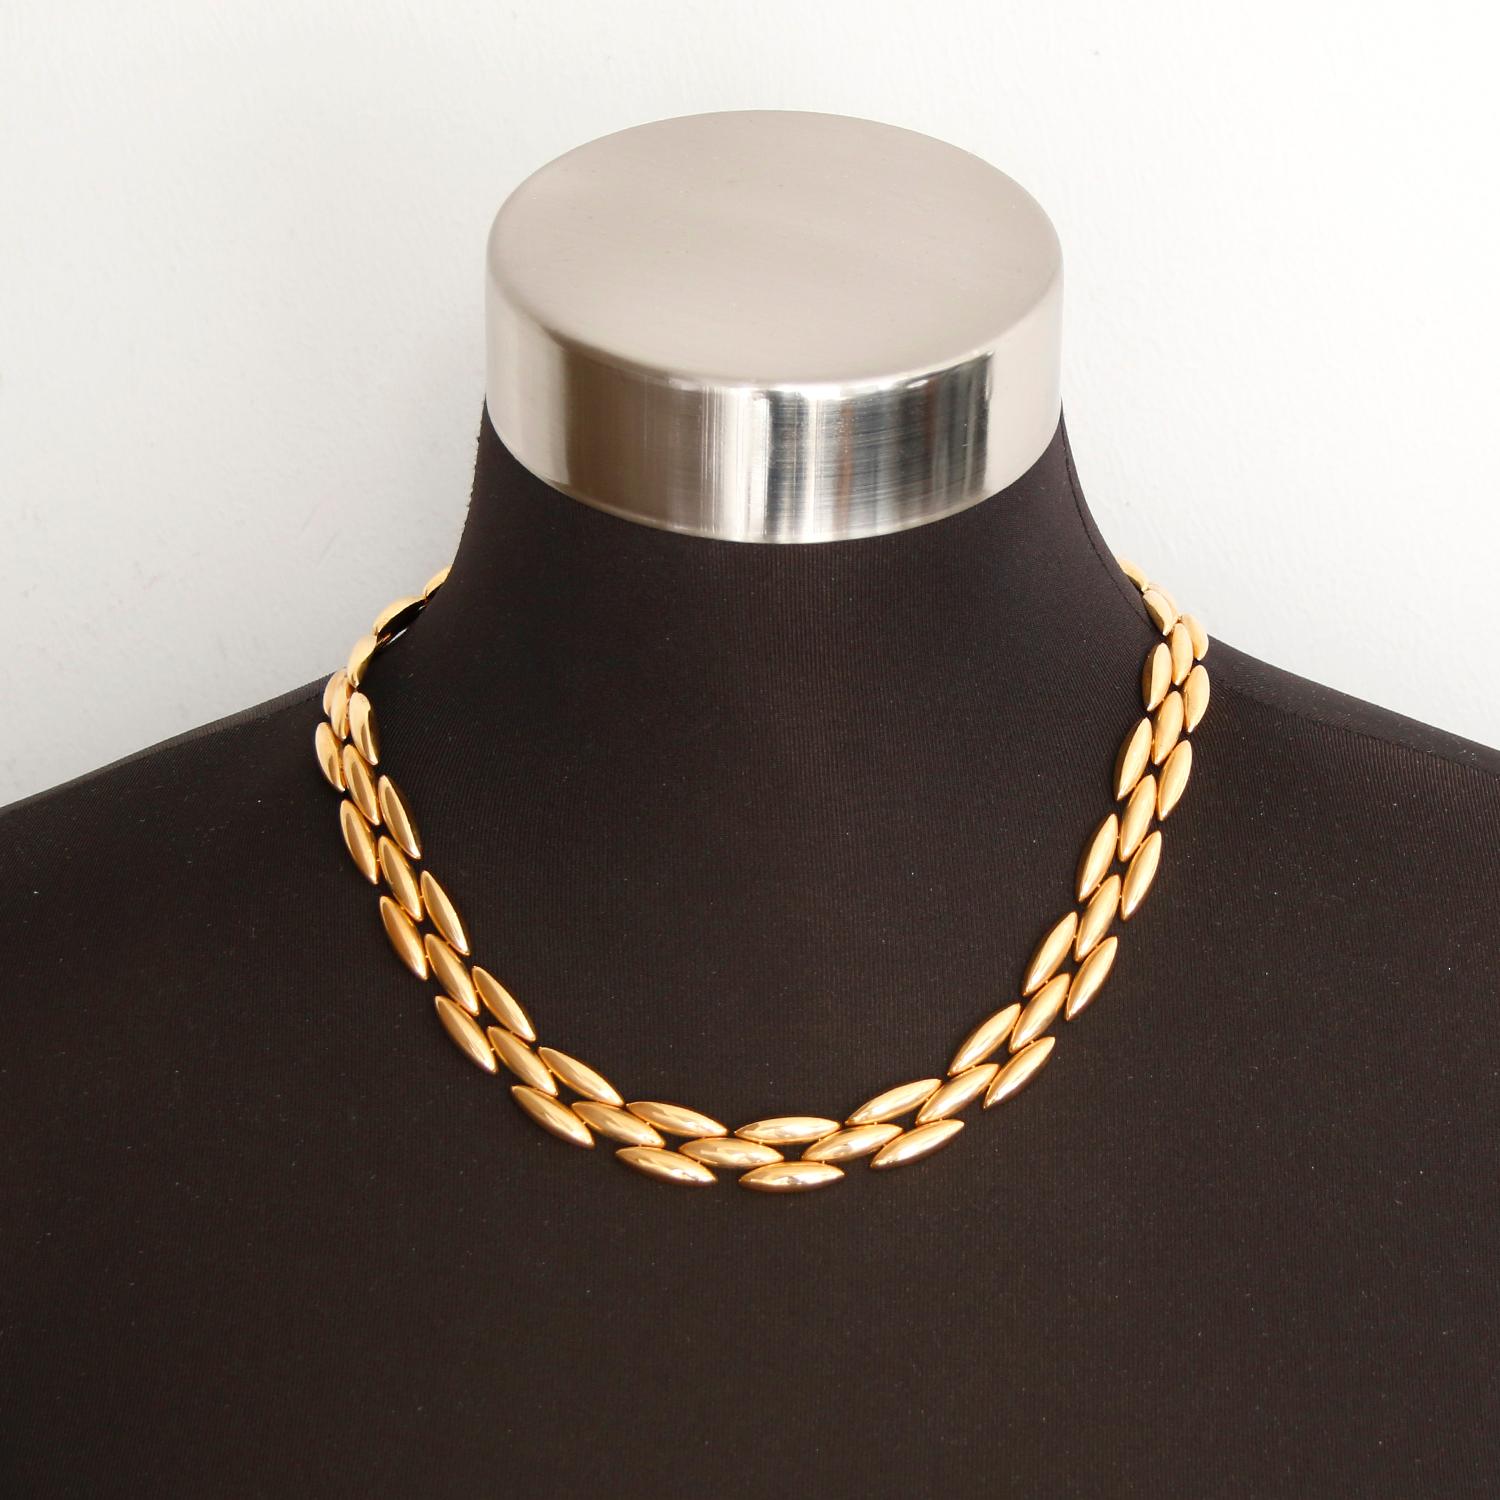 Cartier 18K Yellow Gold Gentiane 3-Row Necklace & Bracelet set - 18K Yellow gold necklace measuring 18 inches in length with a box clasp. 3-Row 18K Yellow gold Gentaine collection bracelet, signed Cartier. 8 inches in length.   Pre-owned with